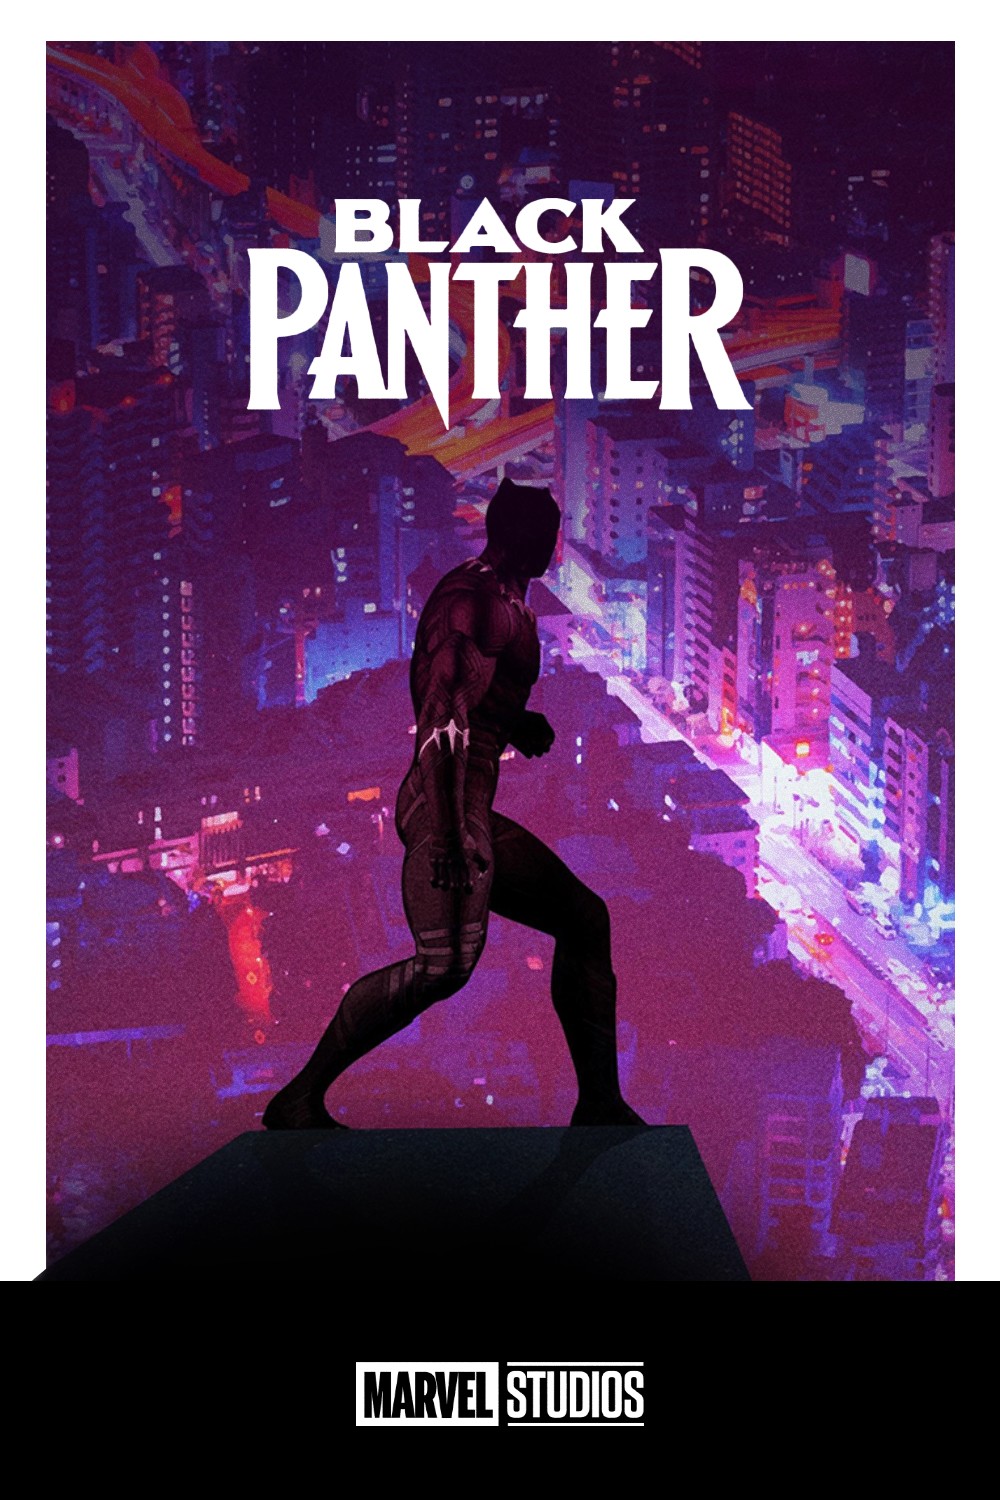 Image BlackPantherALT in MCU Complete Art Poster Collection album.